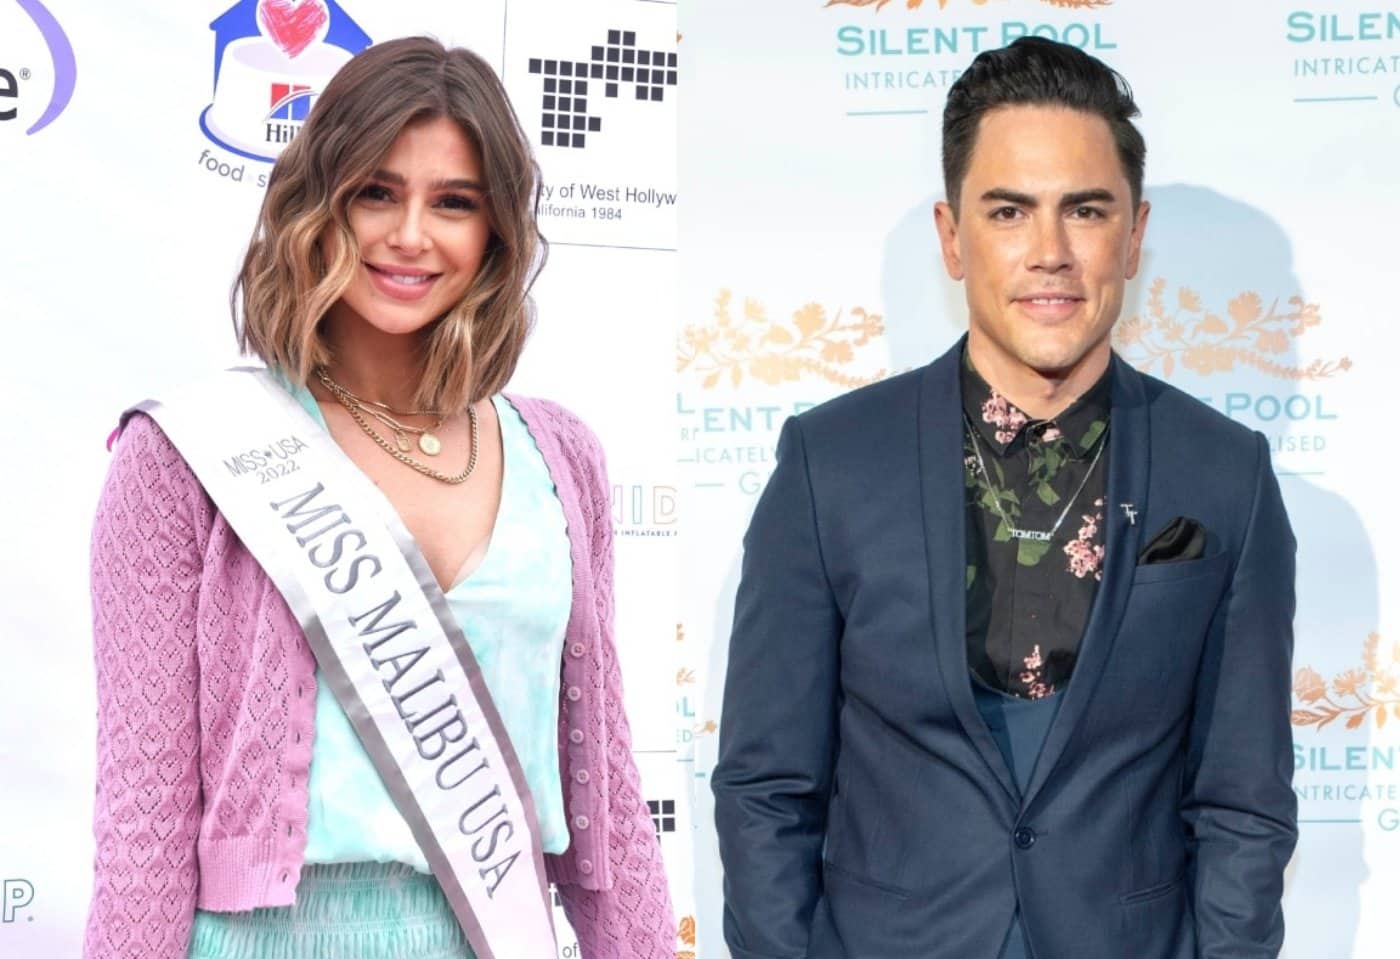 Tom Sandoval and Raquel Leviss are "Wiped out" at Vanderpump Rules meeting as 2 cast members almost come to blows "The most exhausting" Recording, the more Lala expresses herself